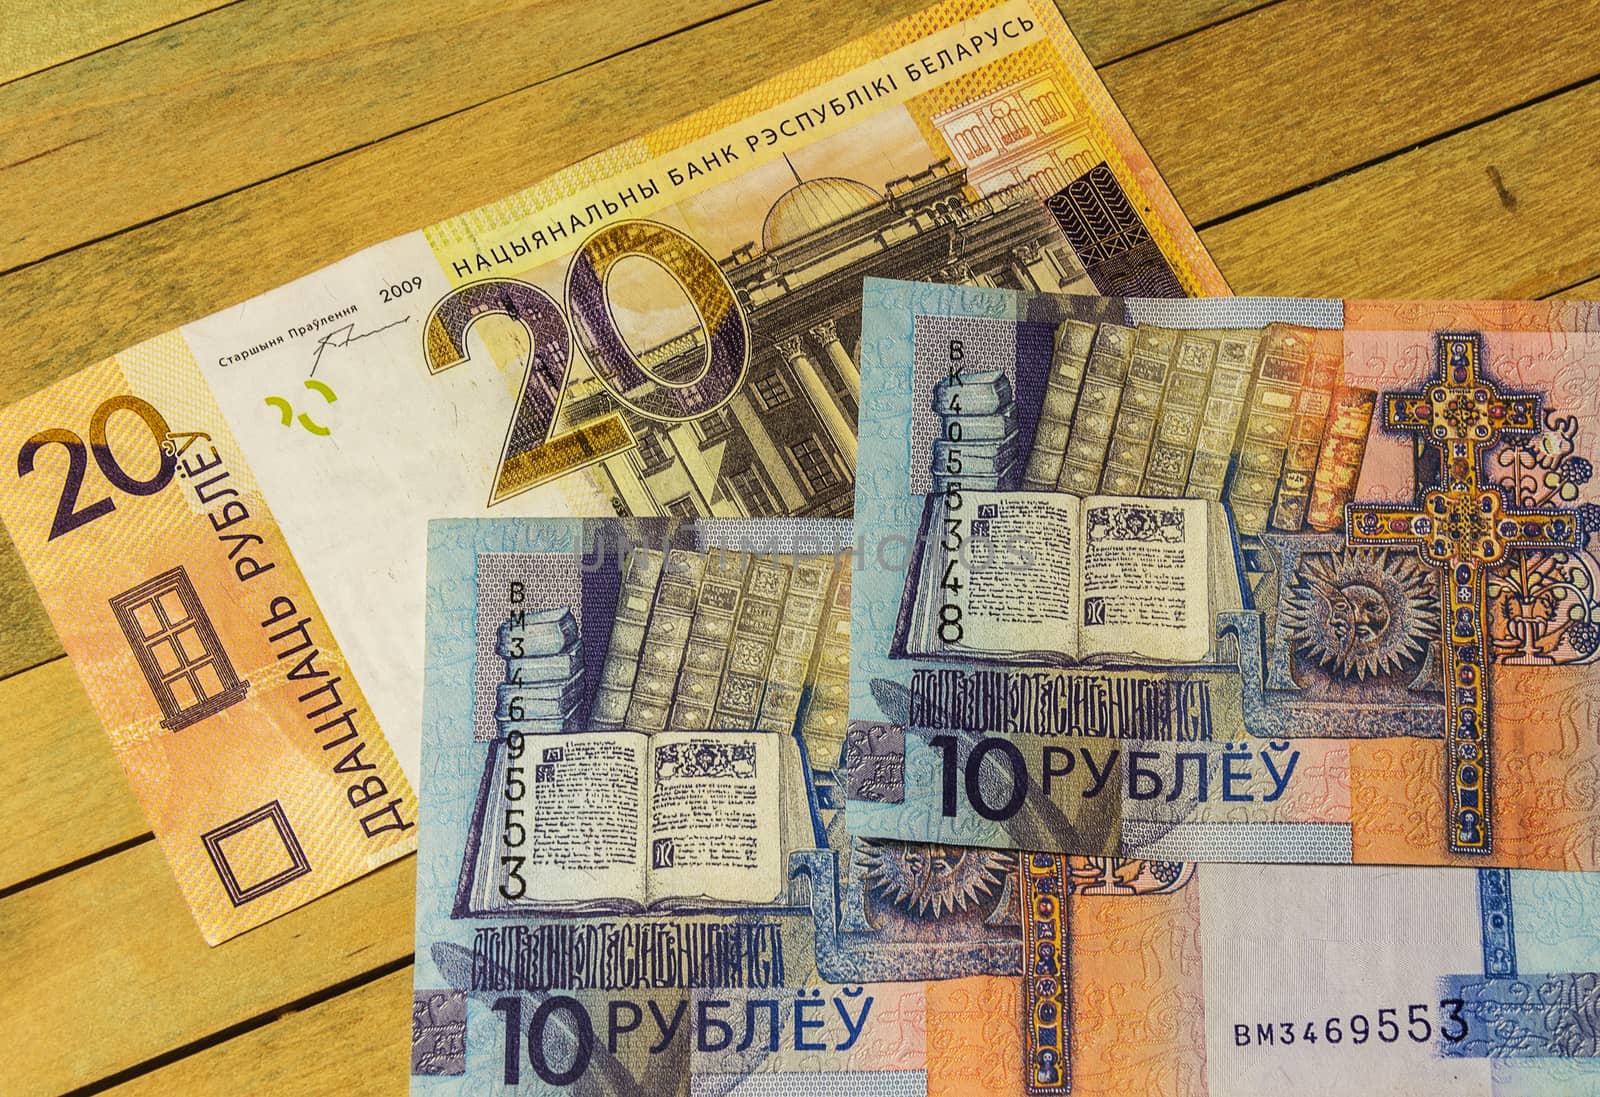 Parts drawings on banknotes of ten and twenty rubles by Grommik